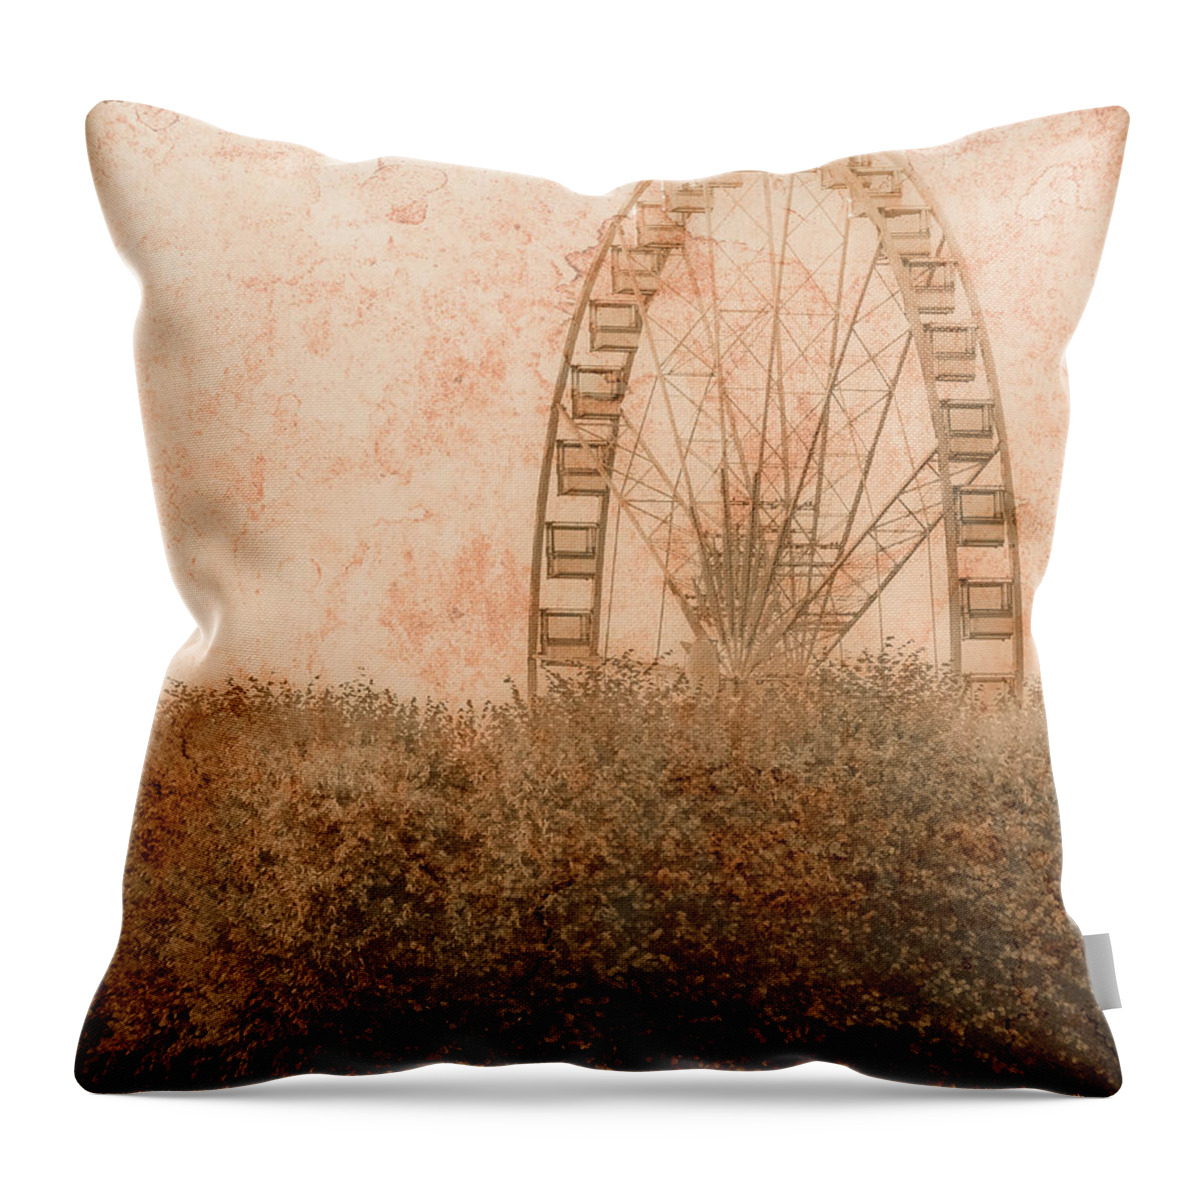 Paris Throw Pillow featuring the photograph Paris, France - Forest Wheel by Mark Forte